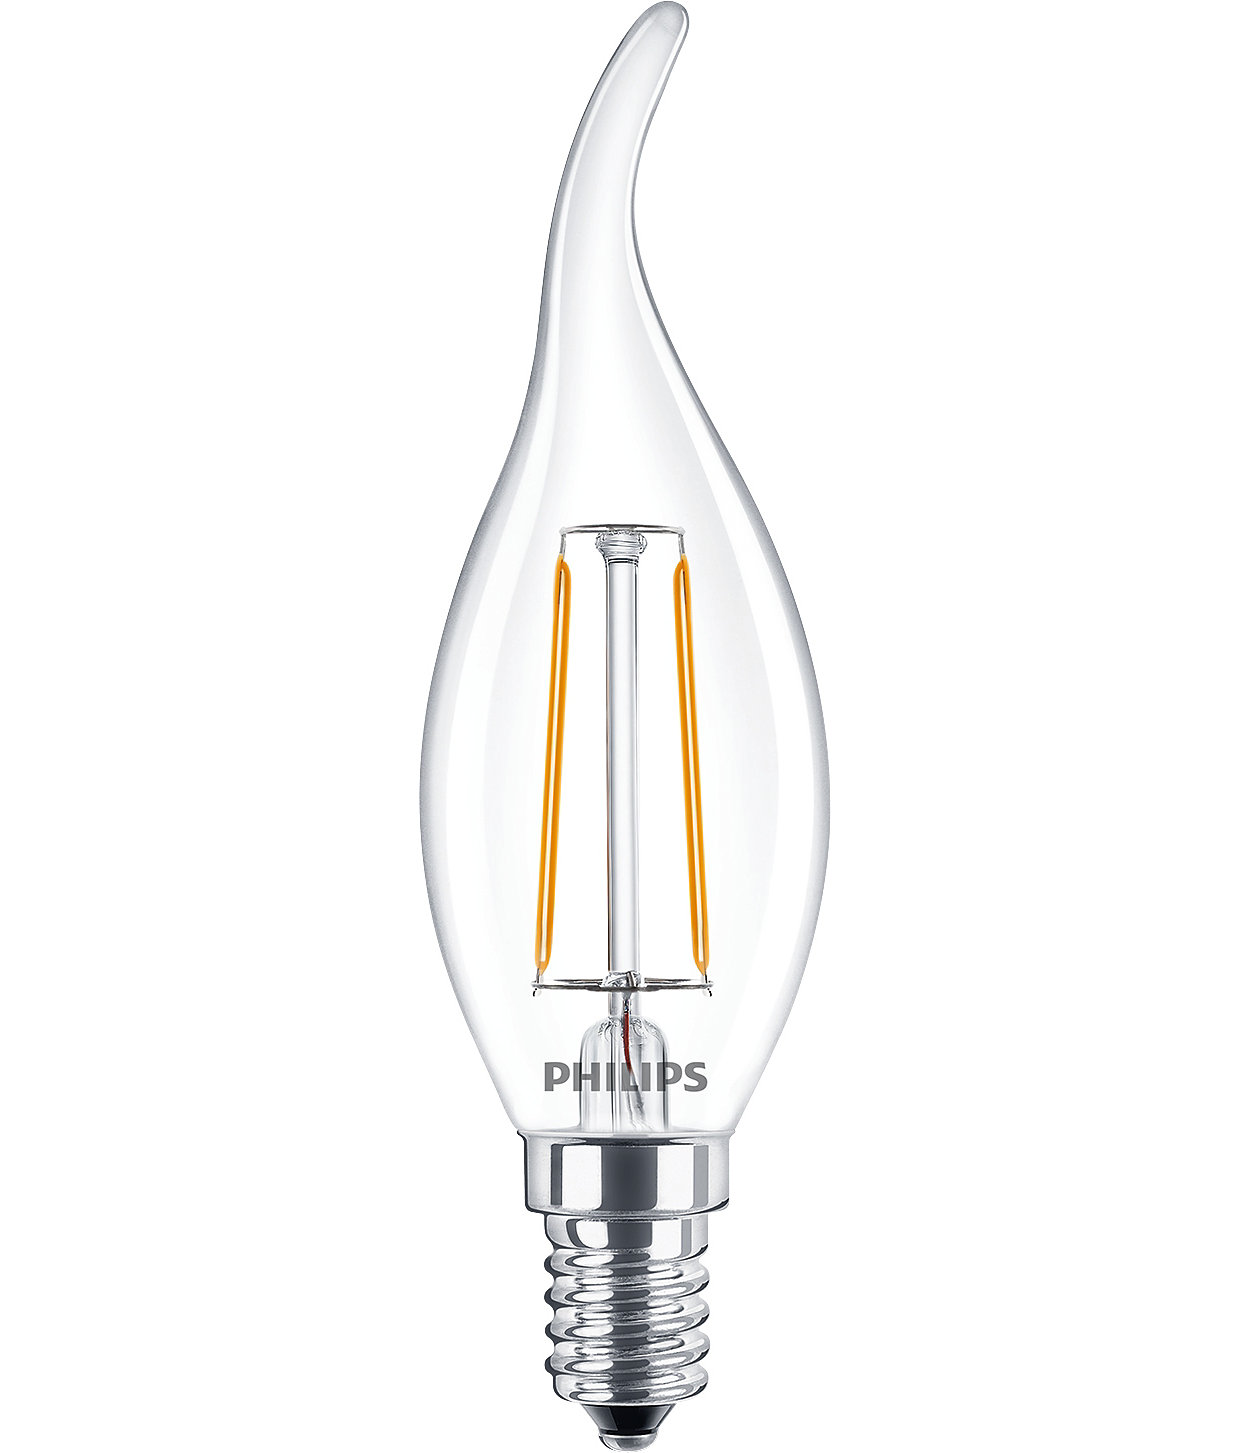 Classic LED filament lamps for decorative lighting